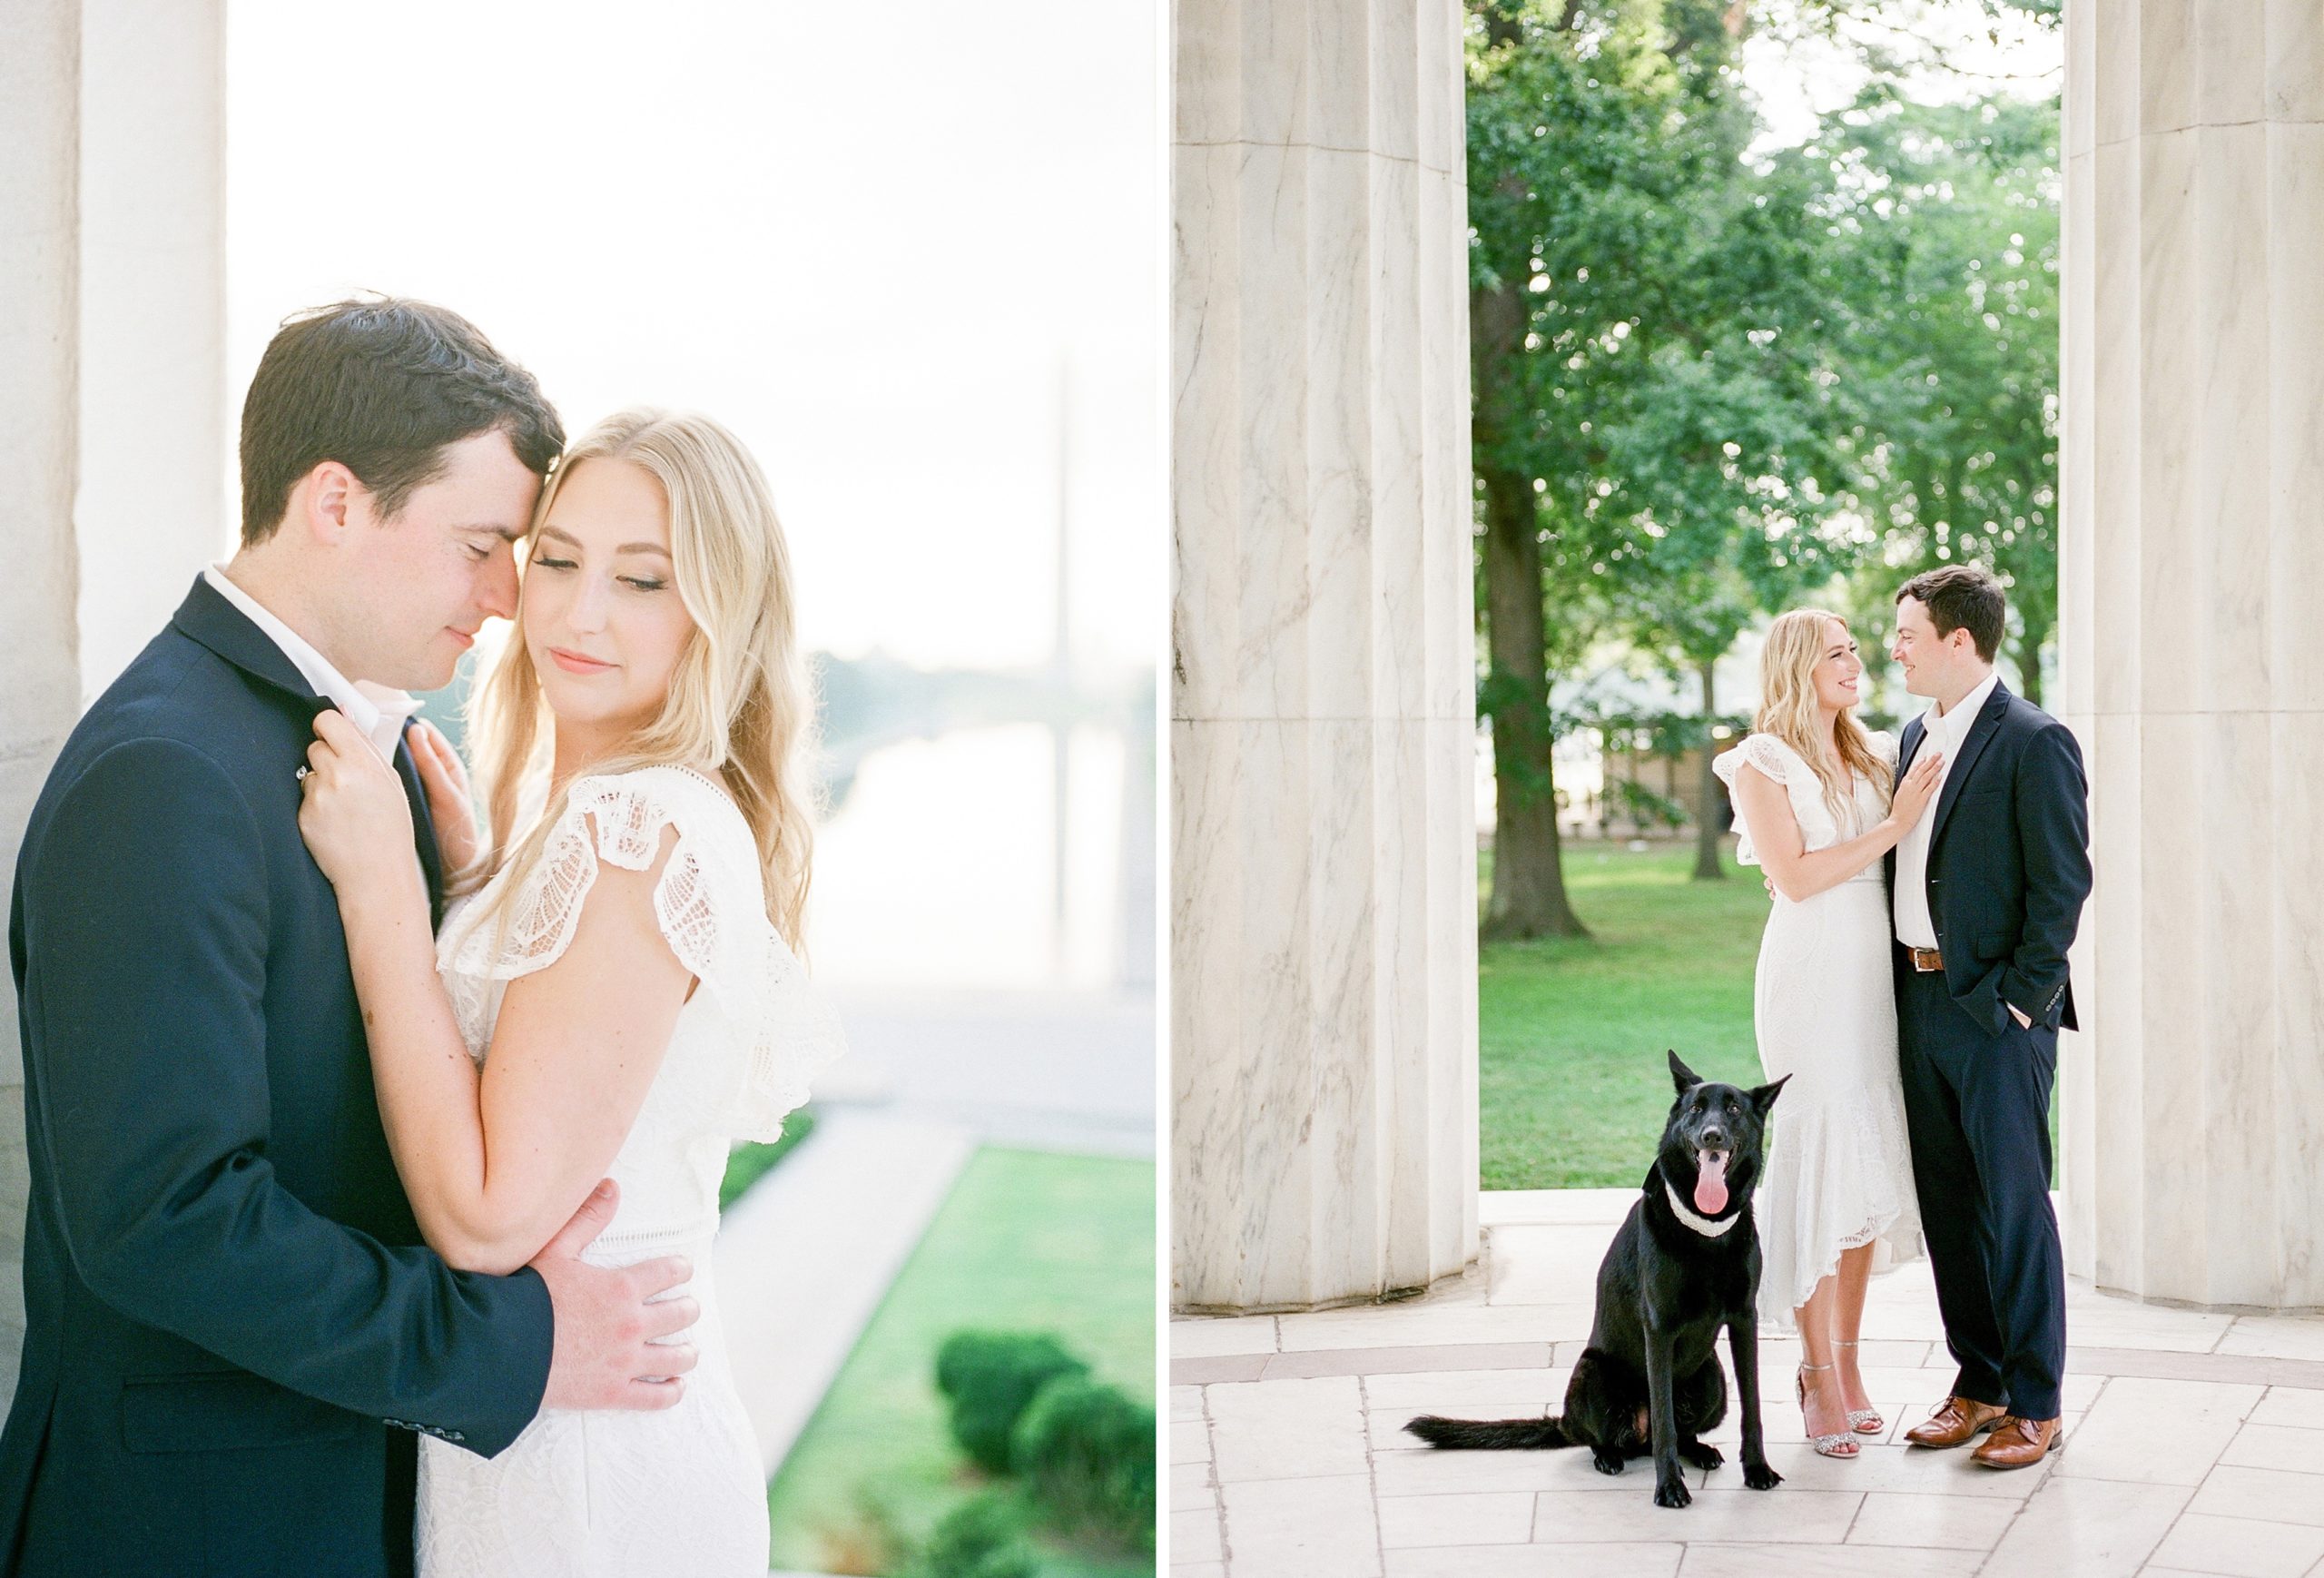 A stunning sunrise engagement session at the iconic monuments in Washington, DC featuring a stylish couple alongside their adorable dog!